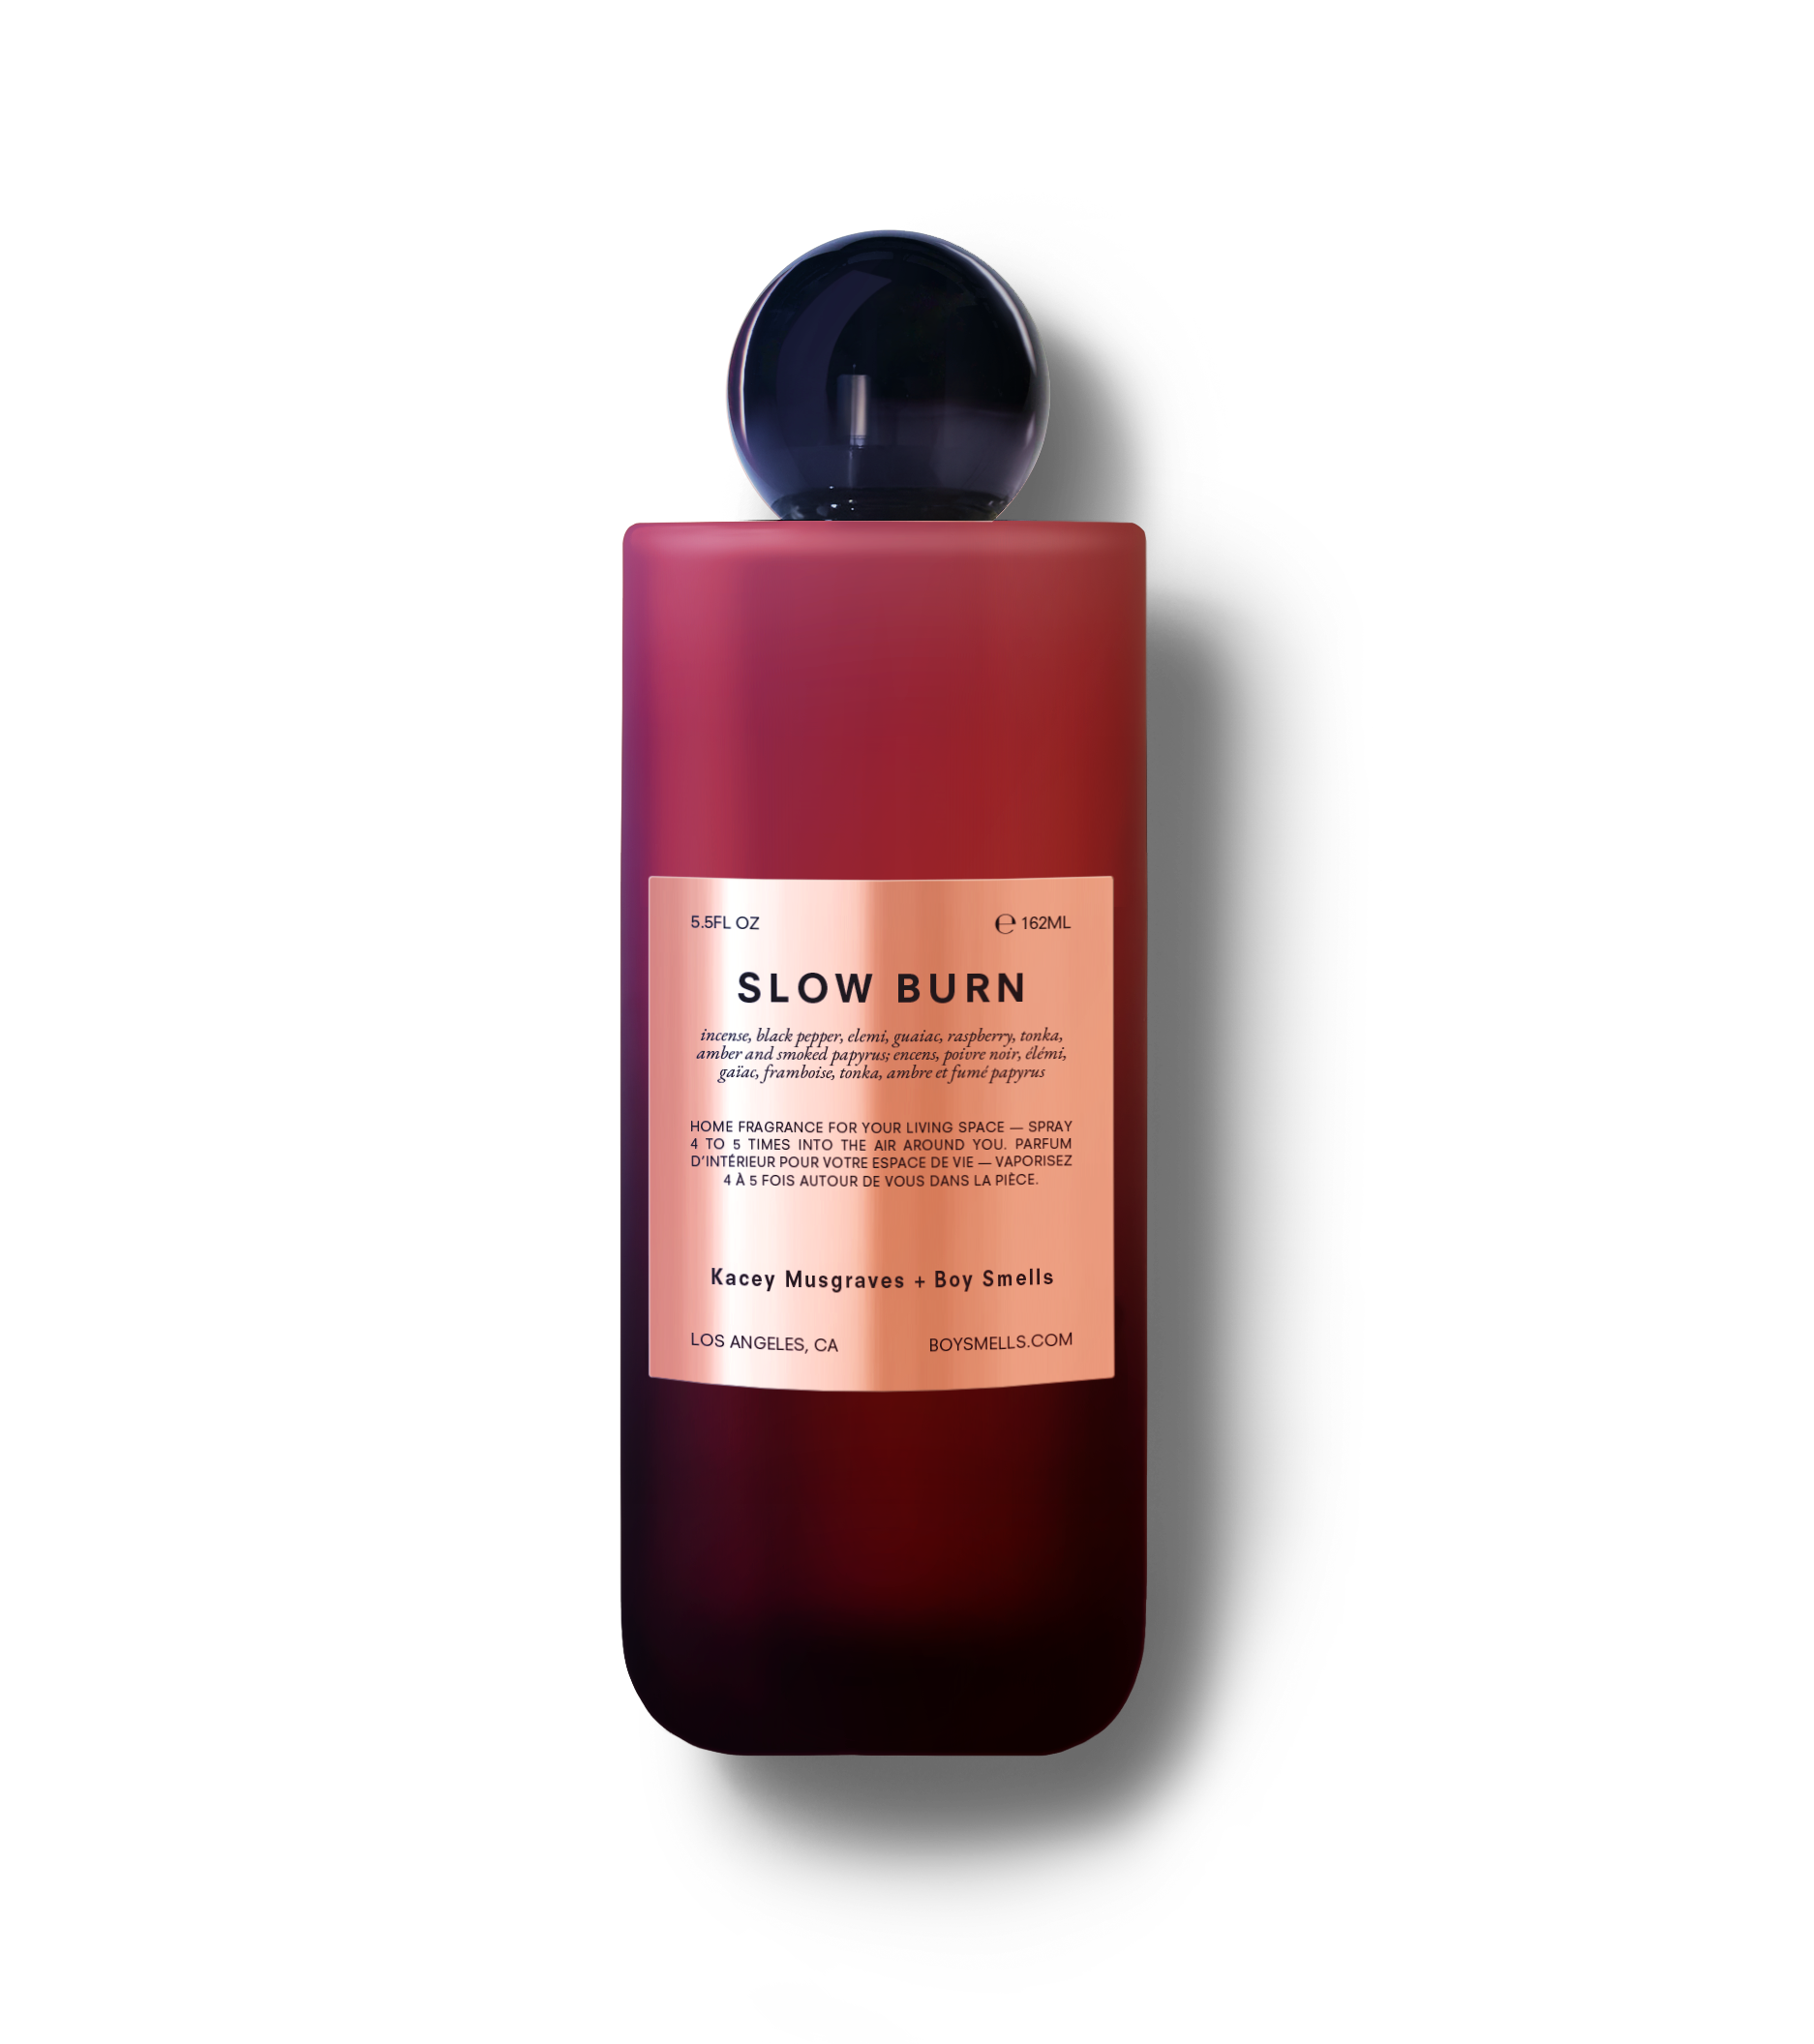 Slow Burn Scented Room Spray of Kacey Musgraves